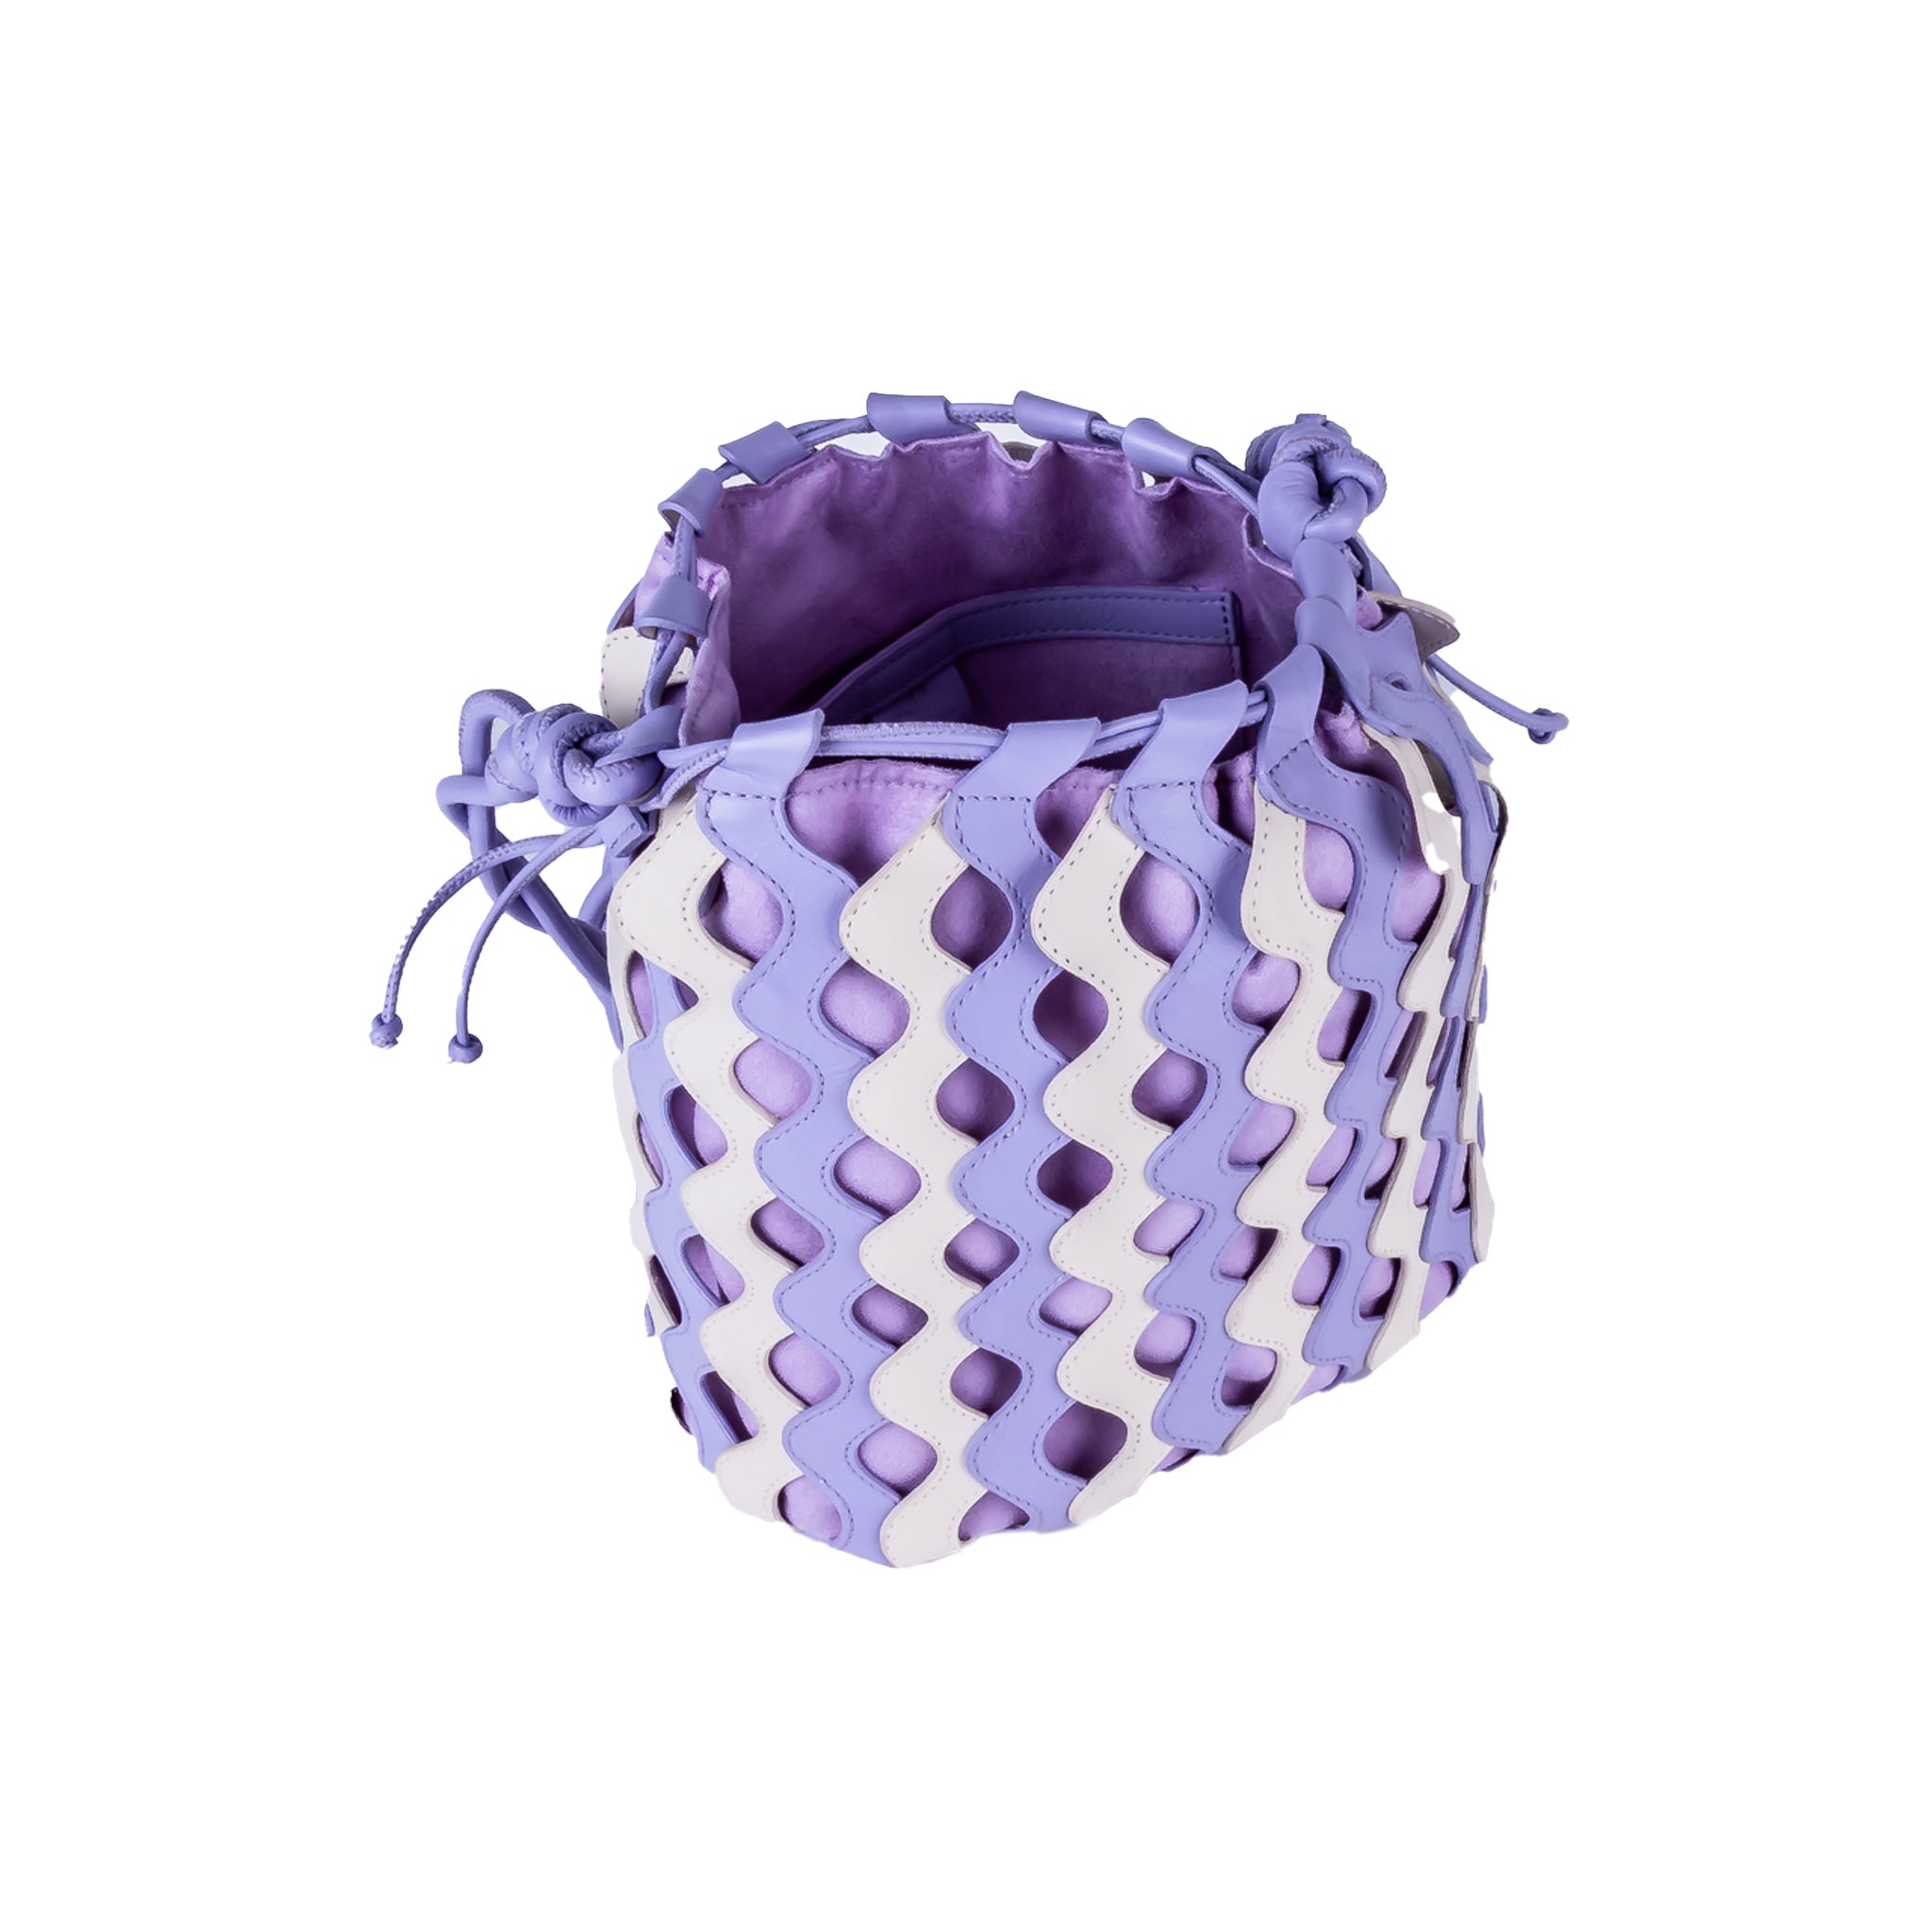 Waves Leather Bucket in Off-White and Lilac